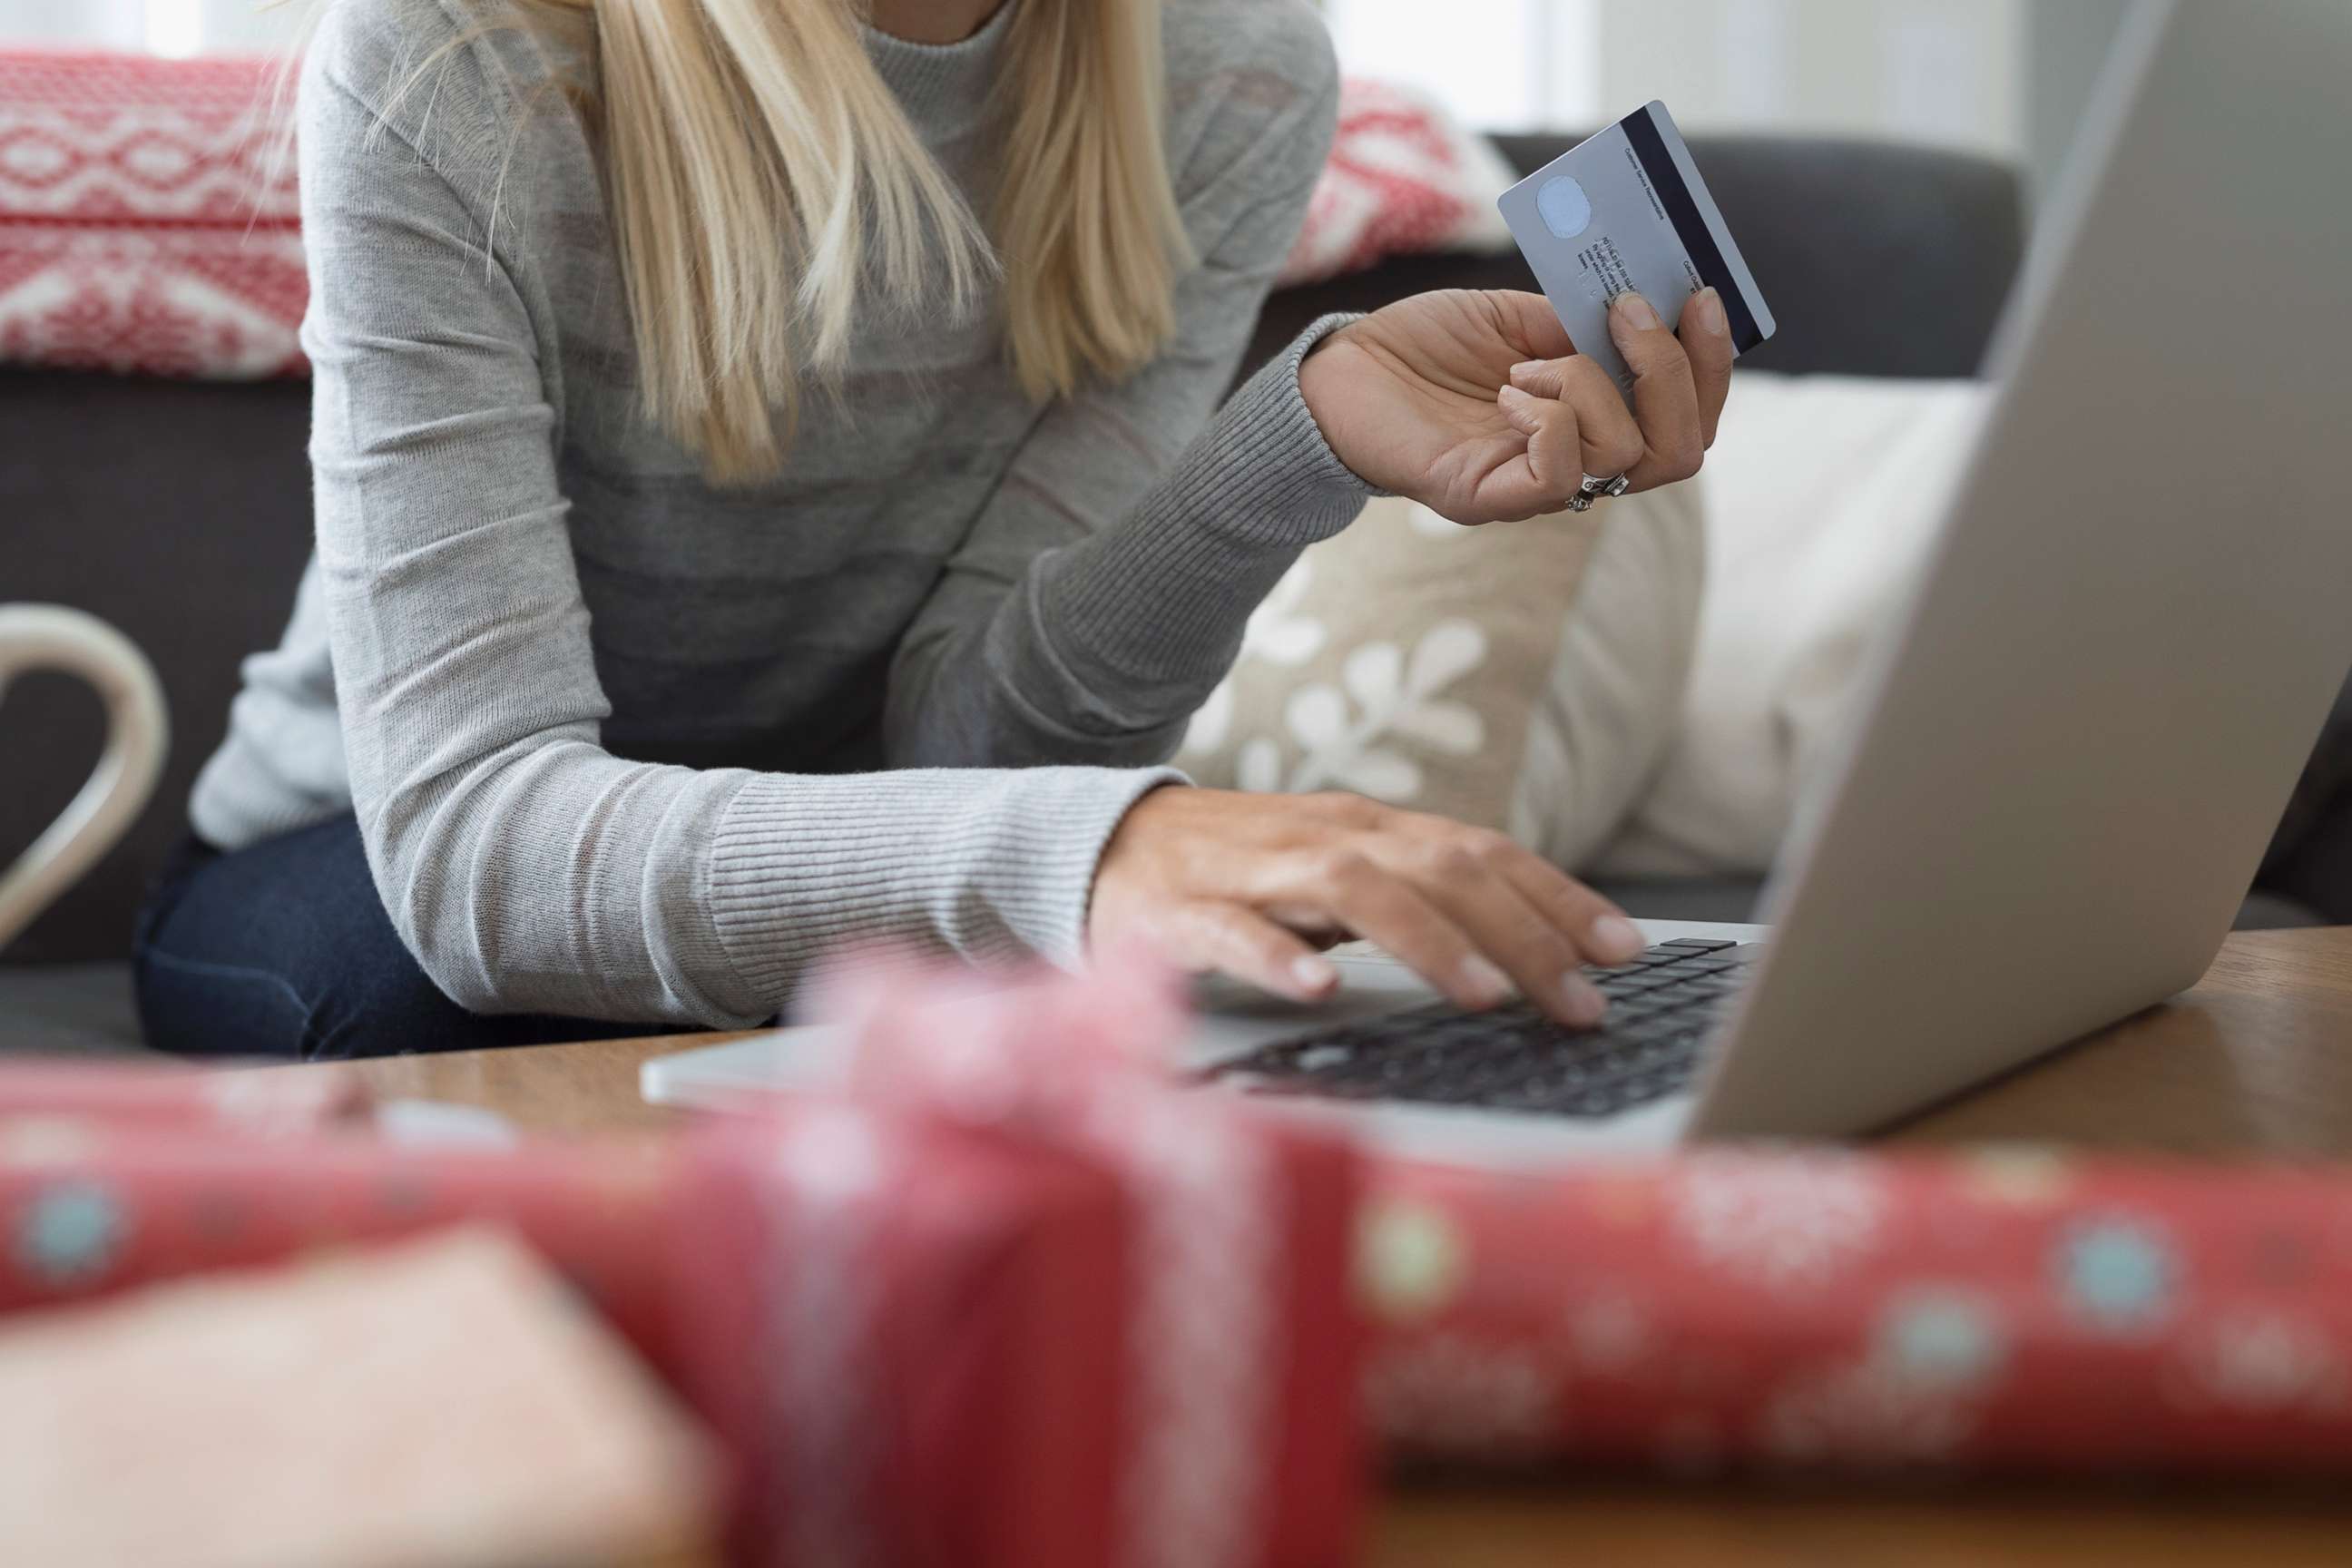 PHOTO: A stock image depicts a woman shopping for holiday presents online.